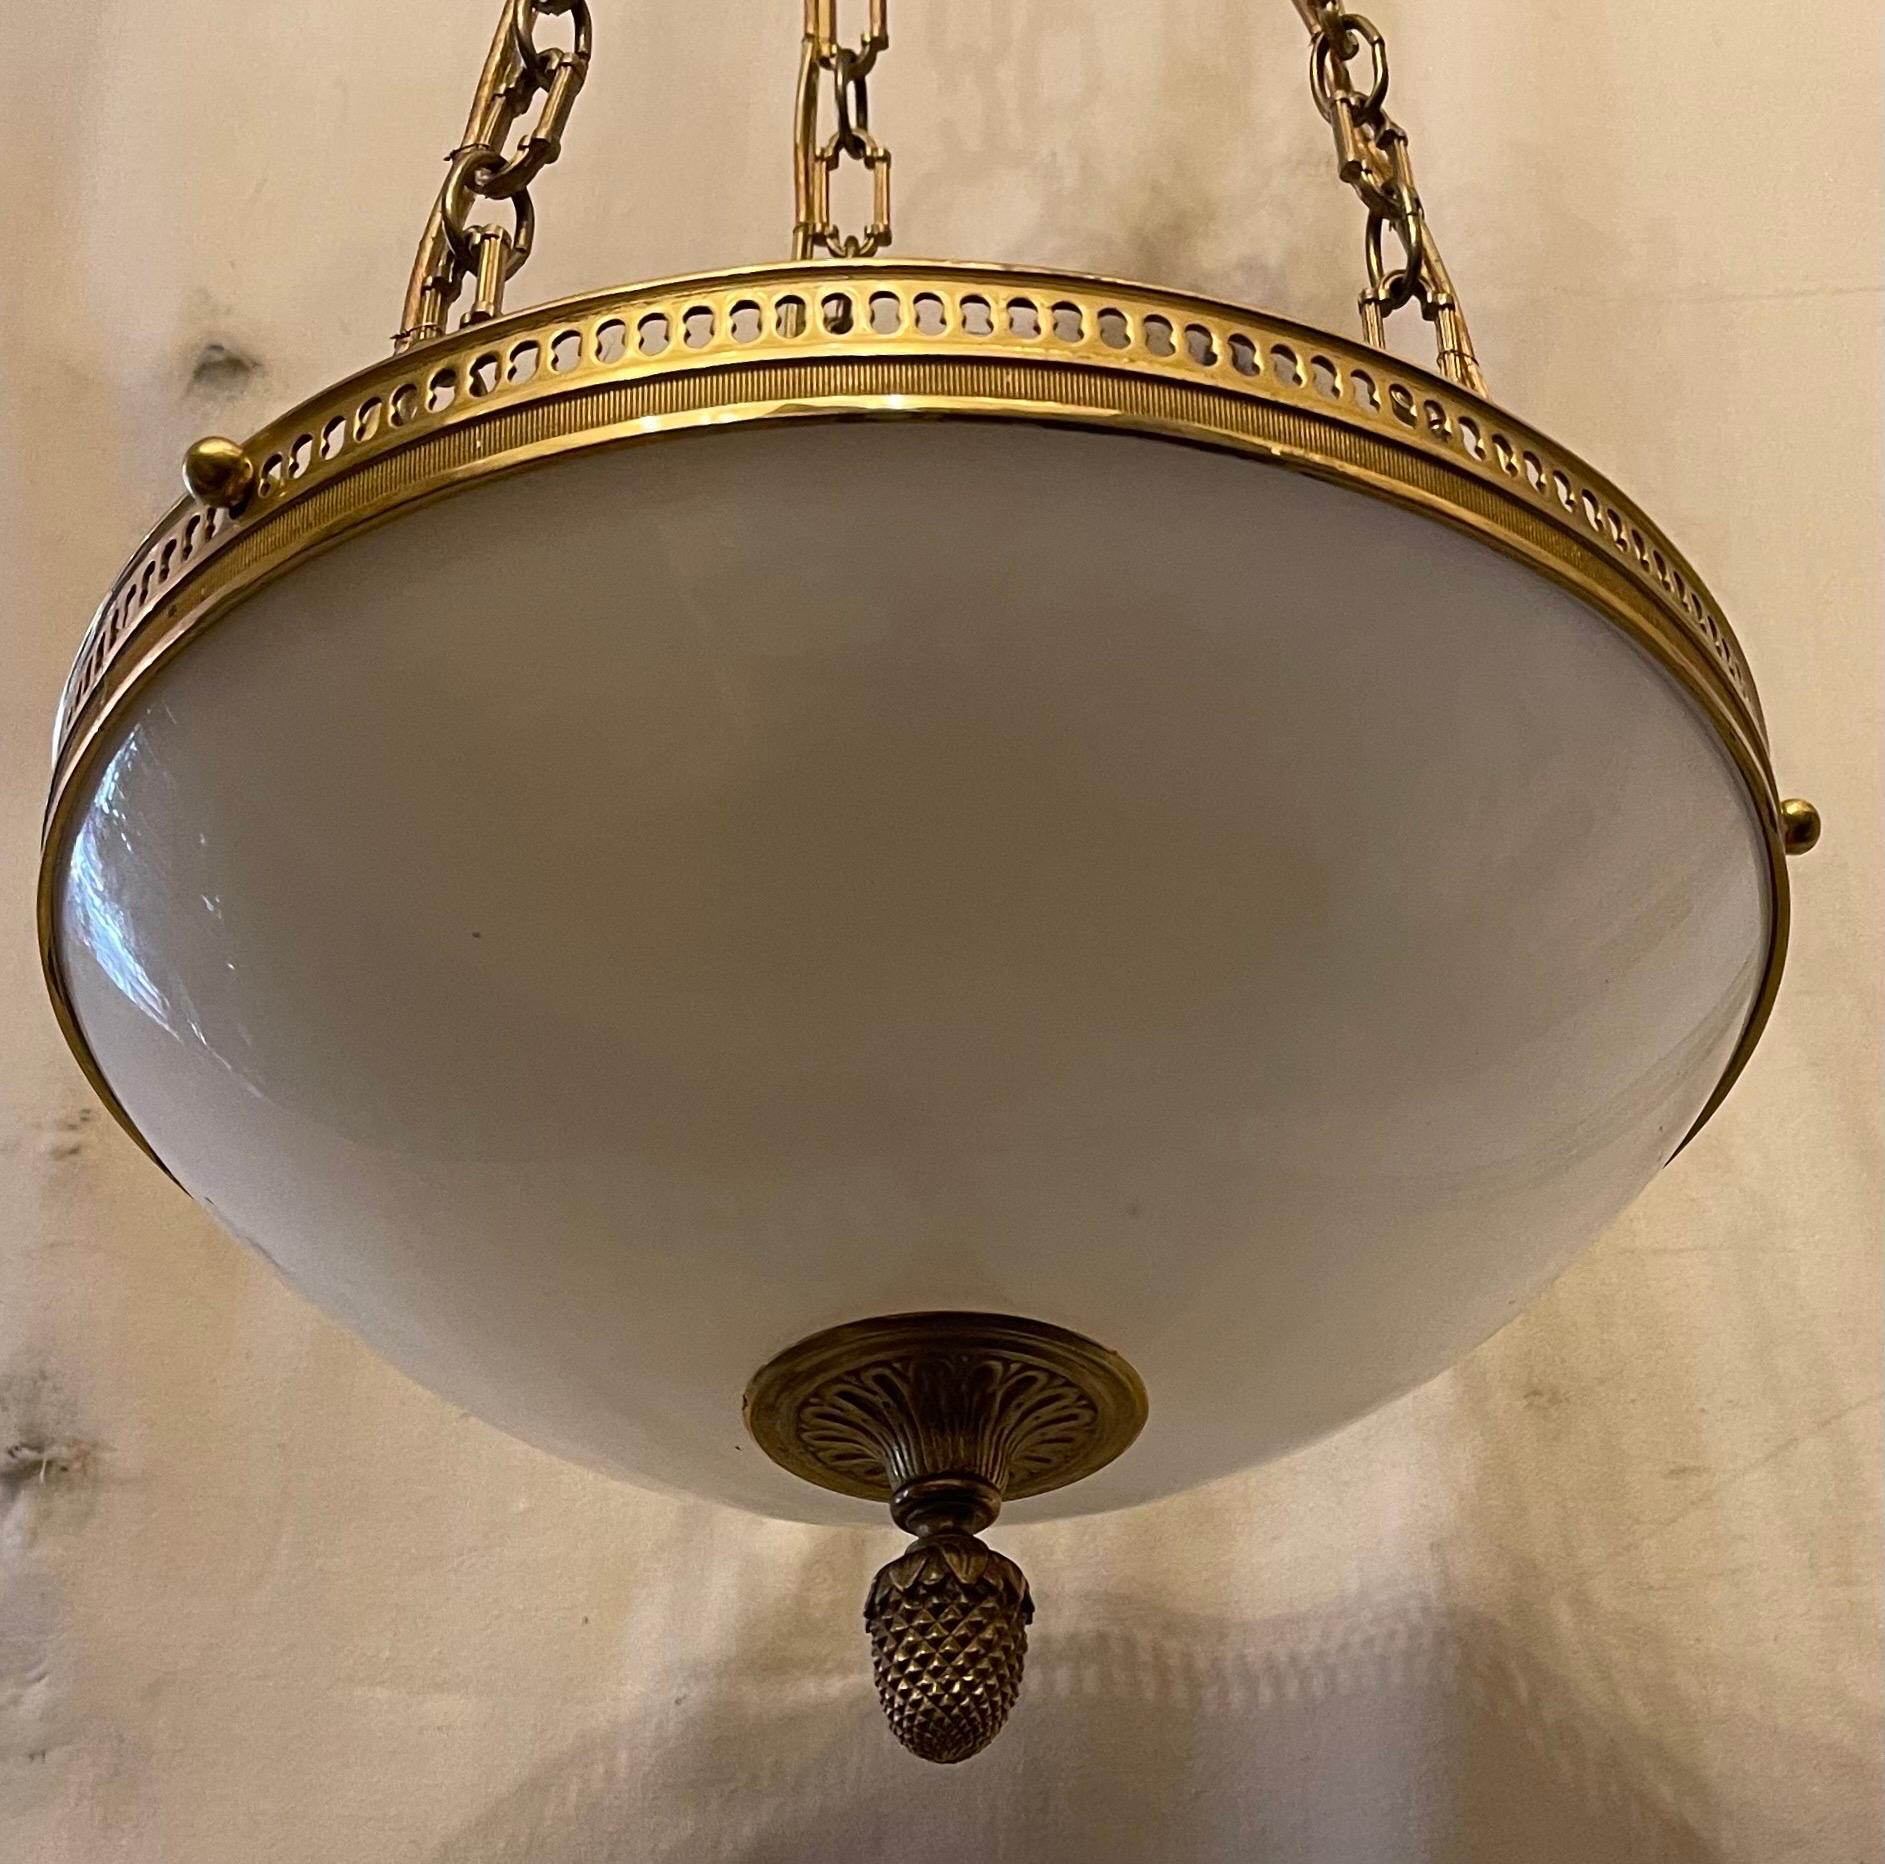 A wonderful Sherle Wagner style vaughan designs dore bronze with white opaline glass bowl chandelier with 3 candelabra sockets.
This fixture can be shortened to your needs by easily removing chain links.